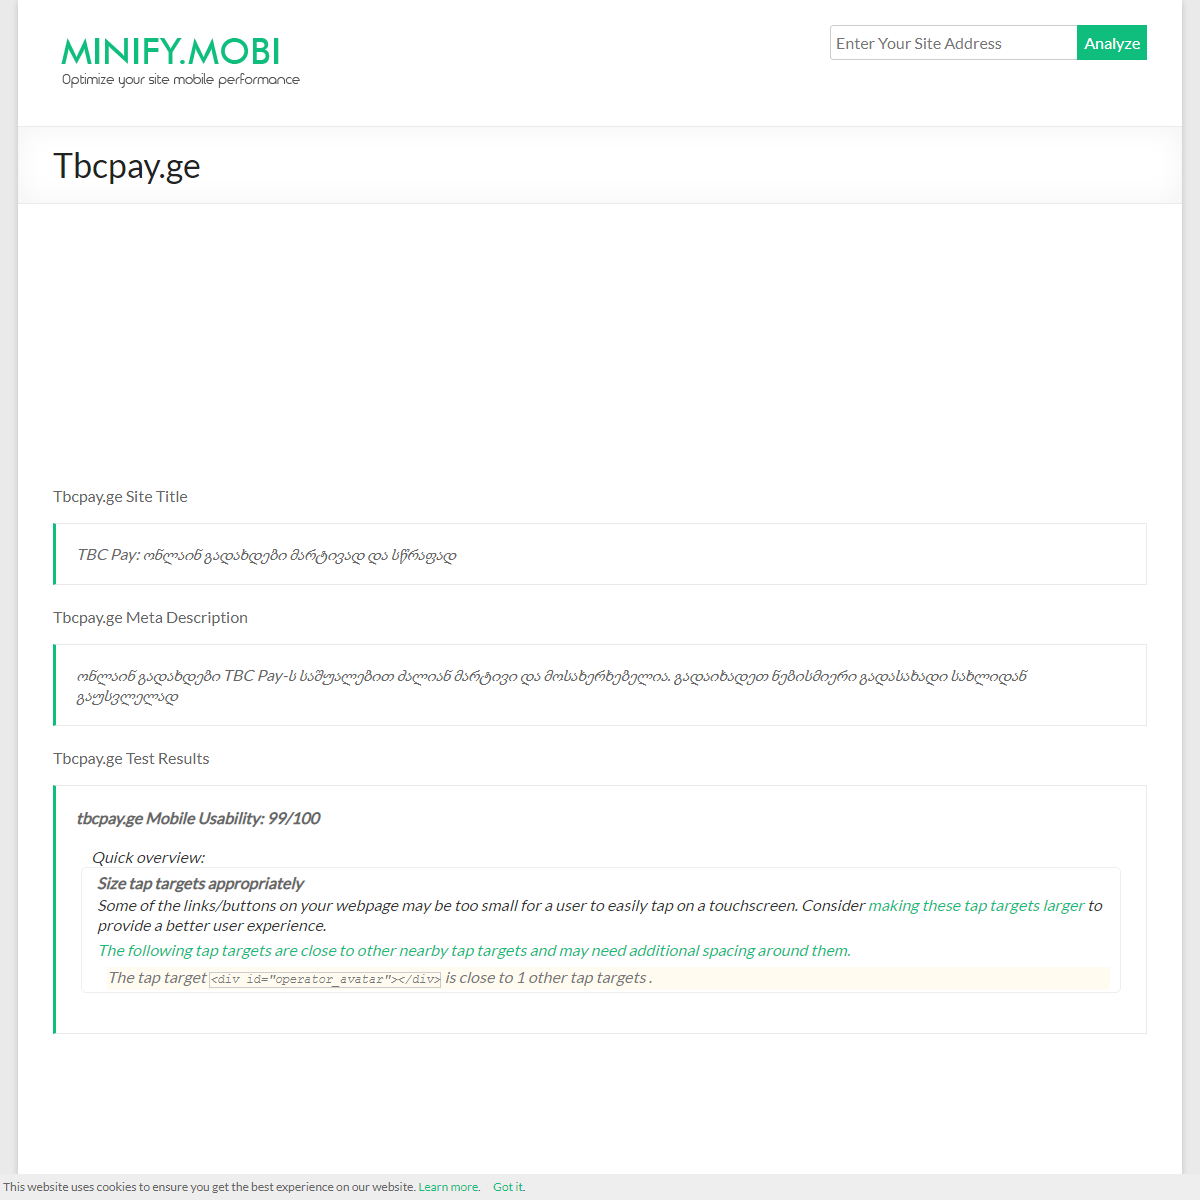 A complete backup of https://minify.mobi/results/tbcpay.ge